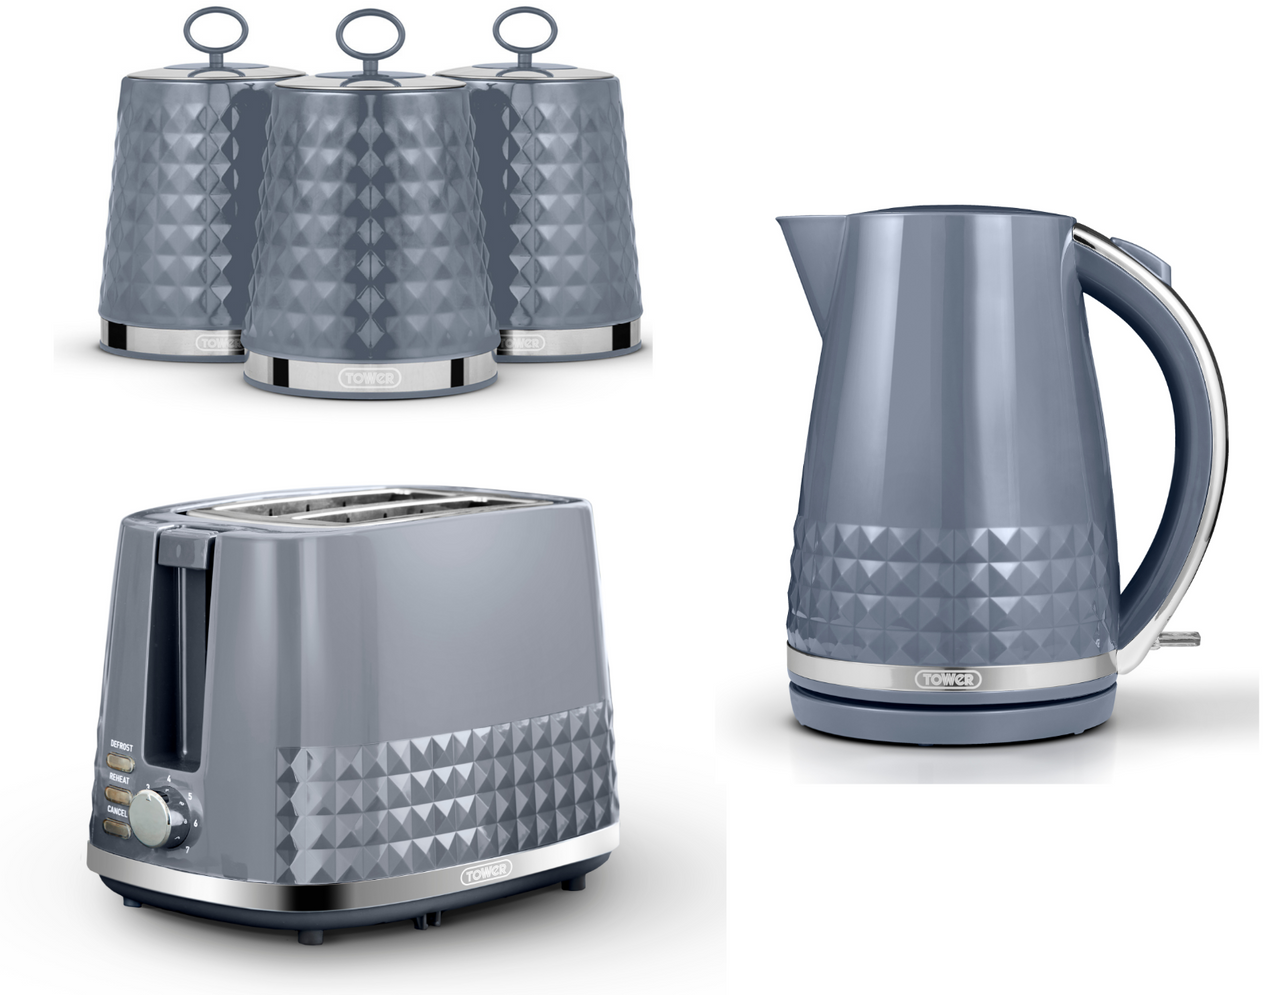 Tower Solitaire Kettle 2 Slice Toaster & Canisters Matching Set Grey & Chrome